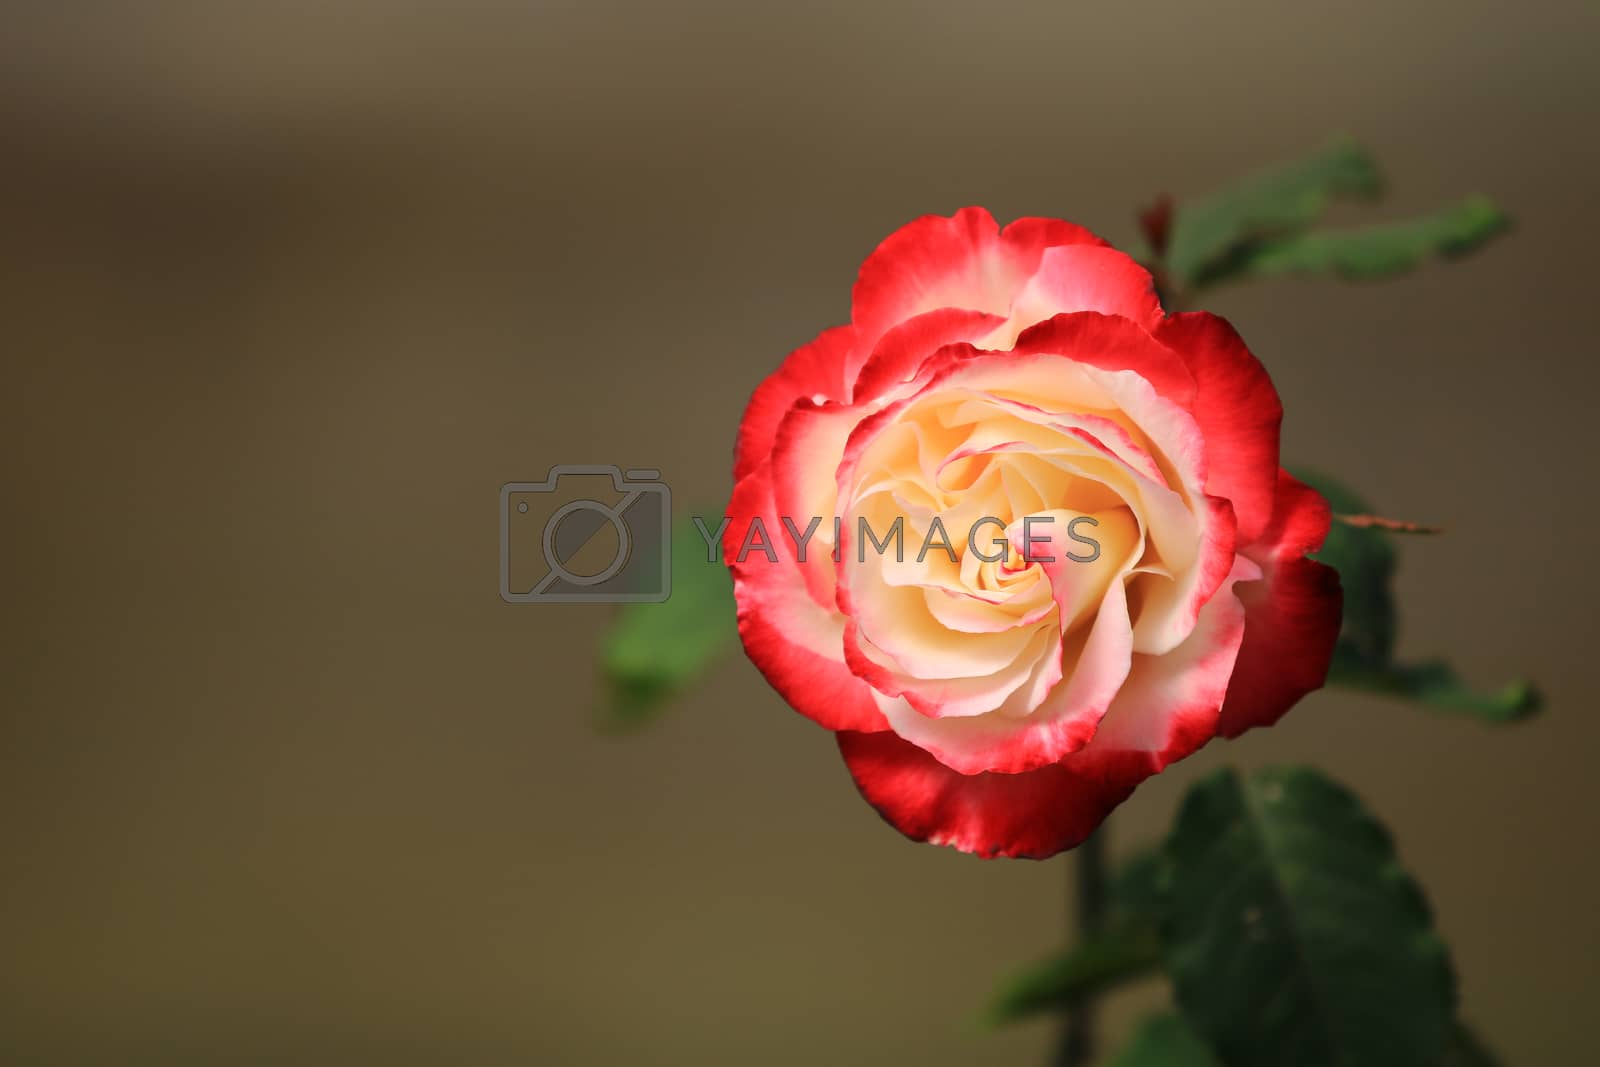 Royalty free image of Red white rose flower on background blurry leaf in the garden of roses,Delicate beauty of close-up rose by anlomaja